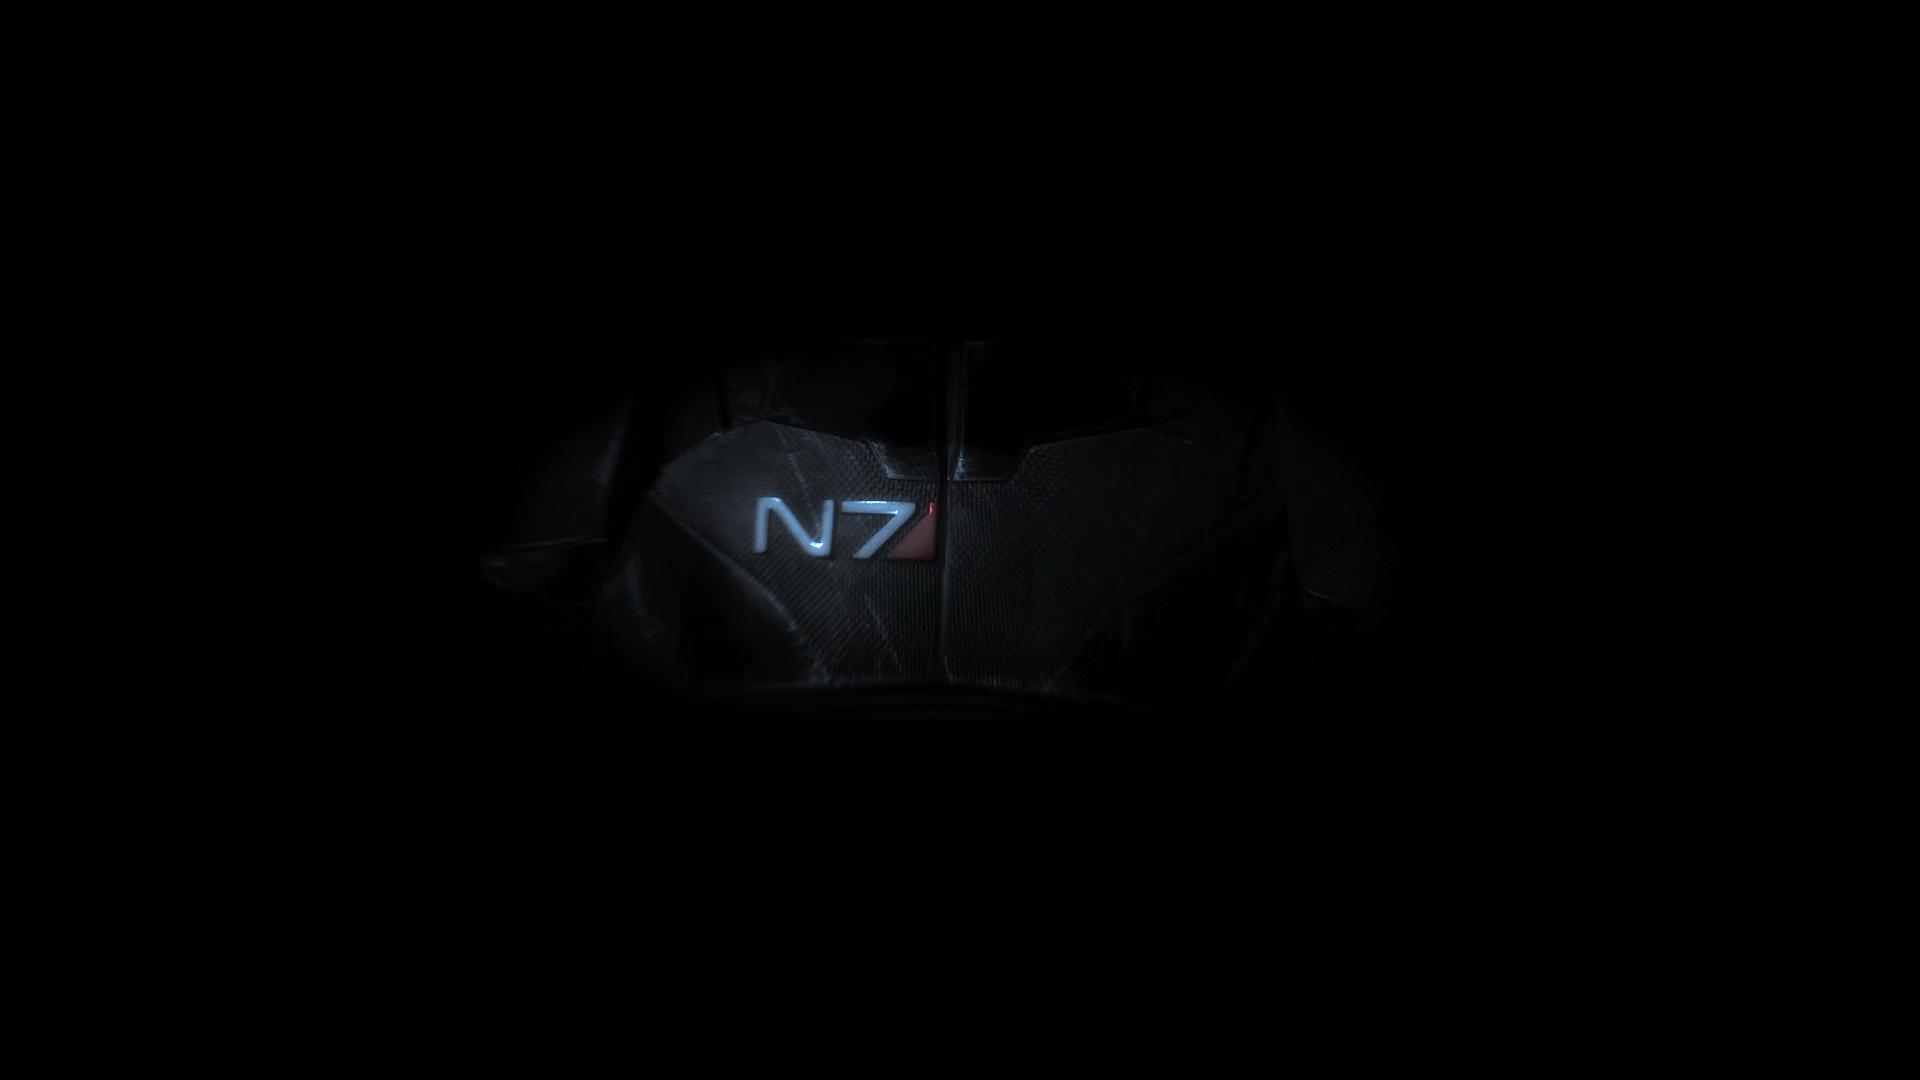 Image For > N7 Wallpapers 1920x1080